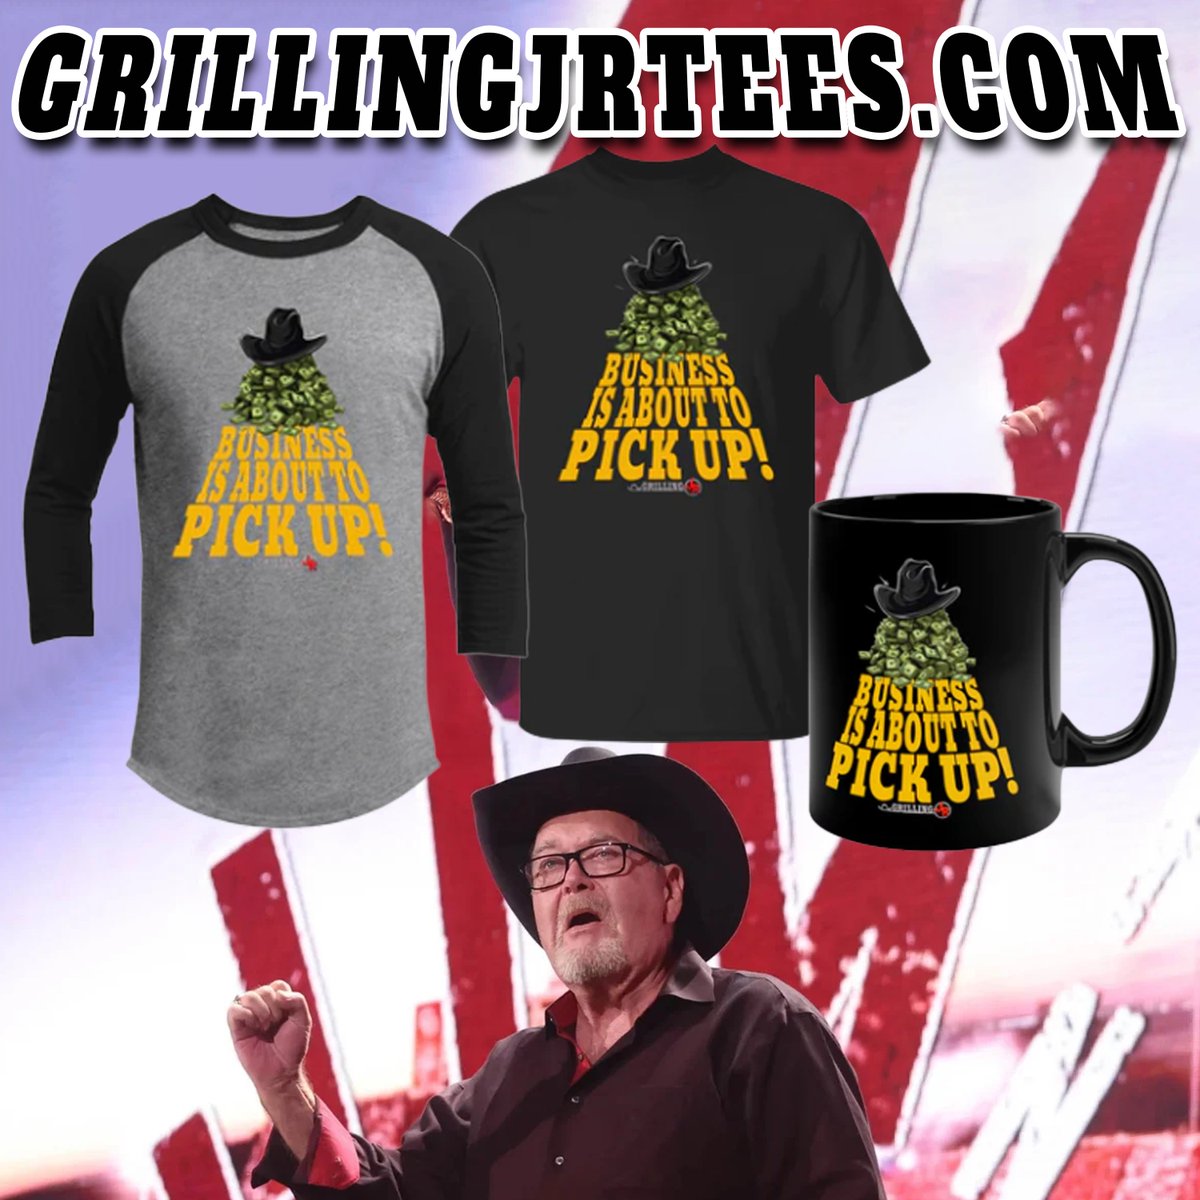 Buckle up! Business Is About To Pick Up! GrillingJRTees.com